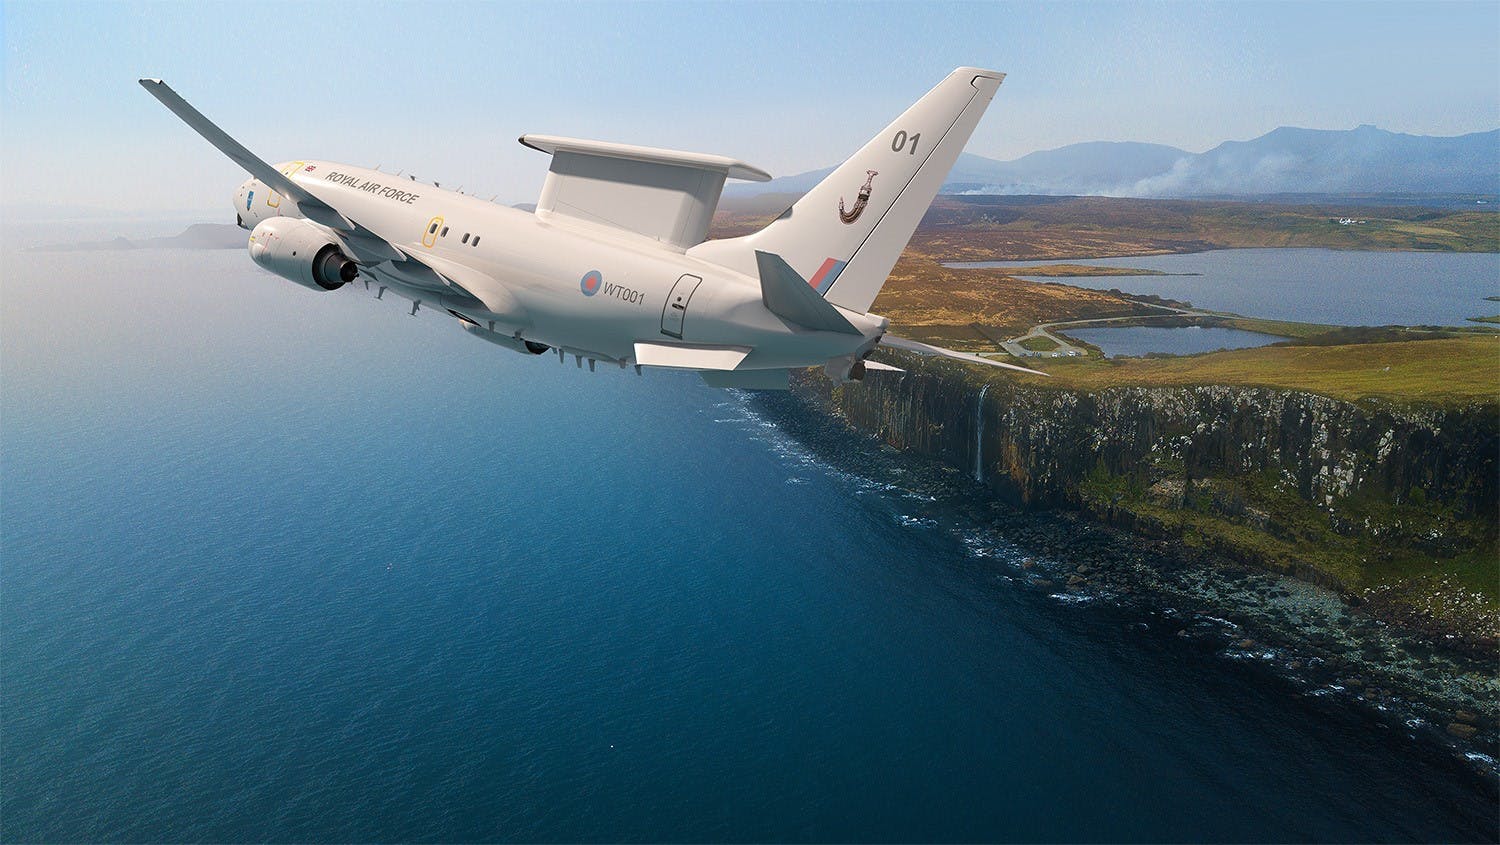 RAF hoping for more E-7 Wedgetail early warning aircraft